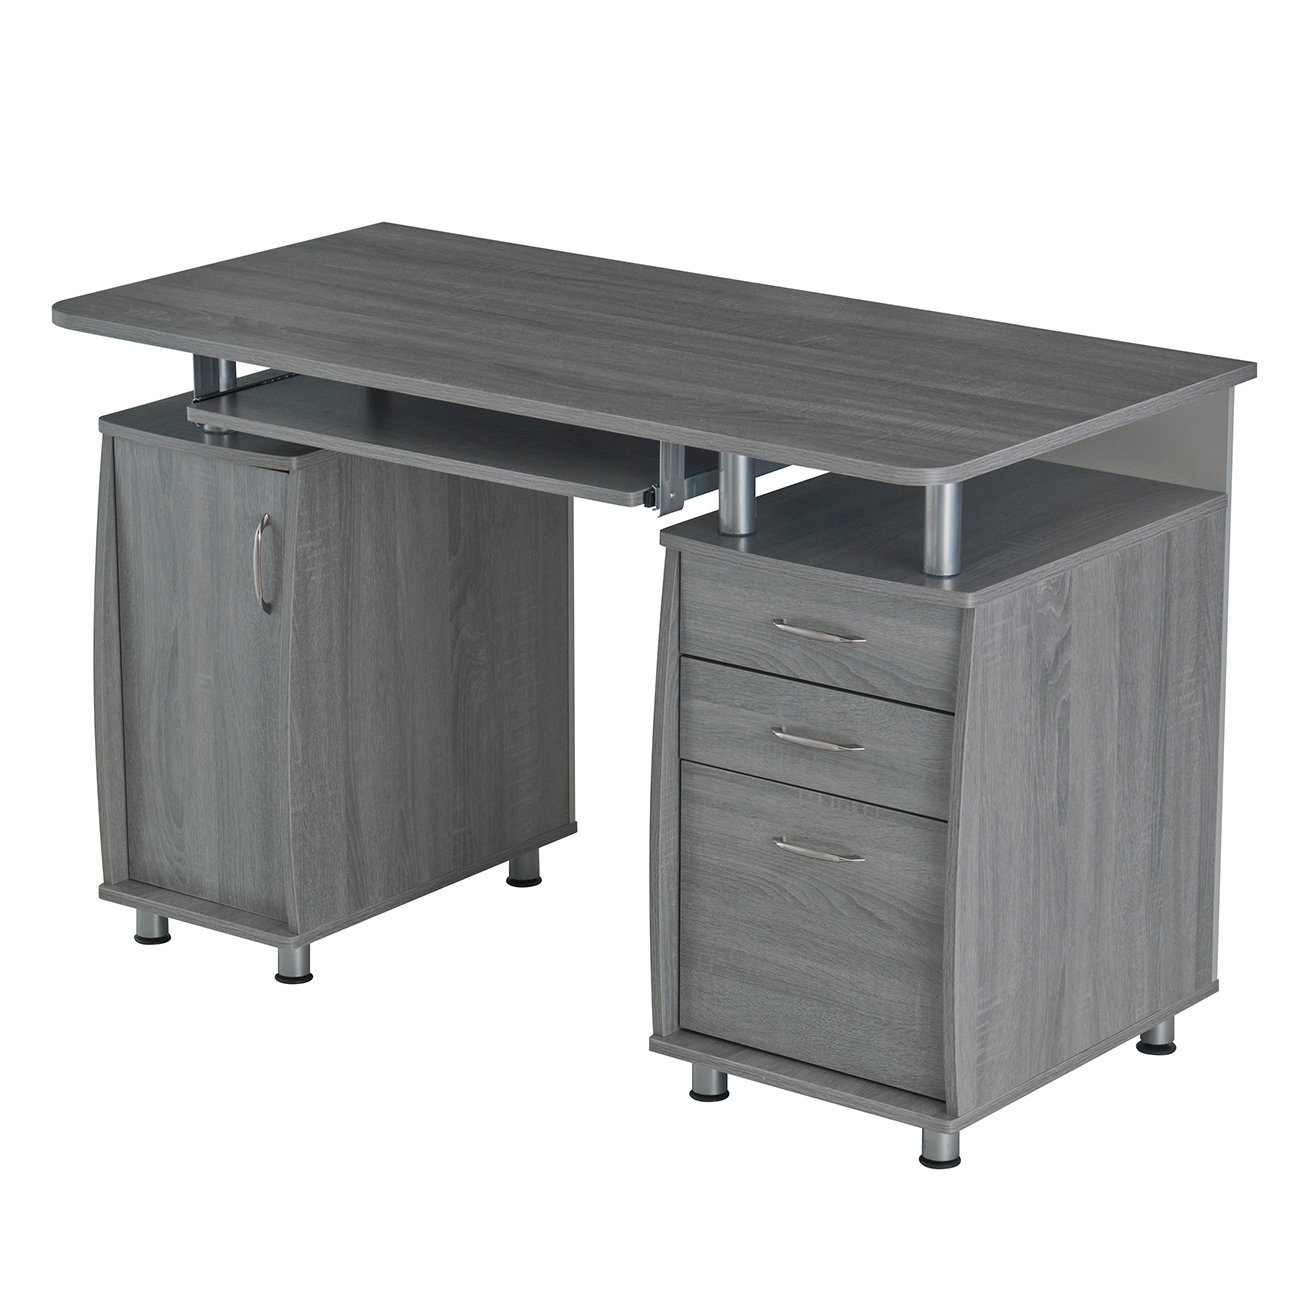 Techni Mobili Complete Adult Computer Workstation with Cabinet and Drawers, 30" H, Gray - image 5 of 11